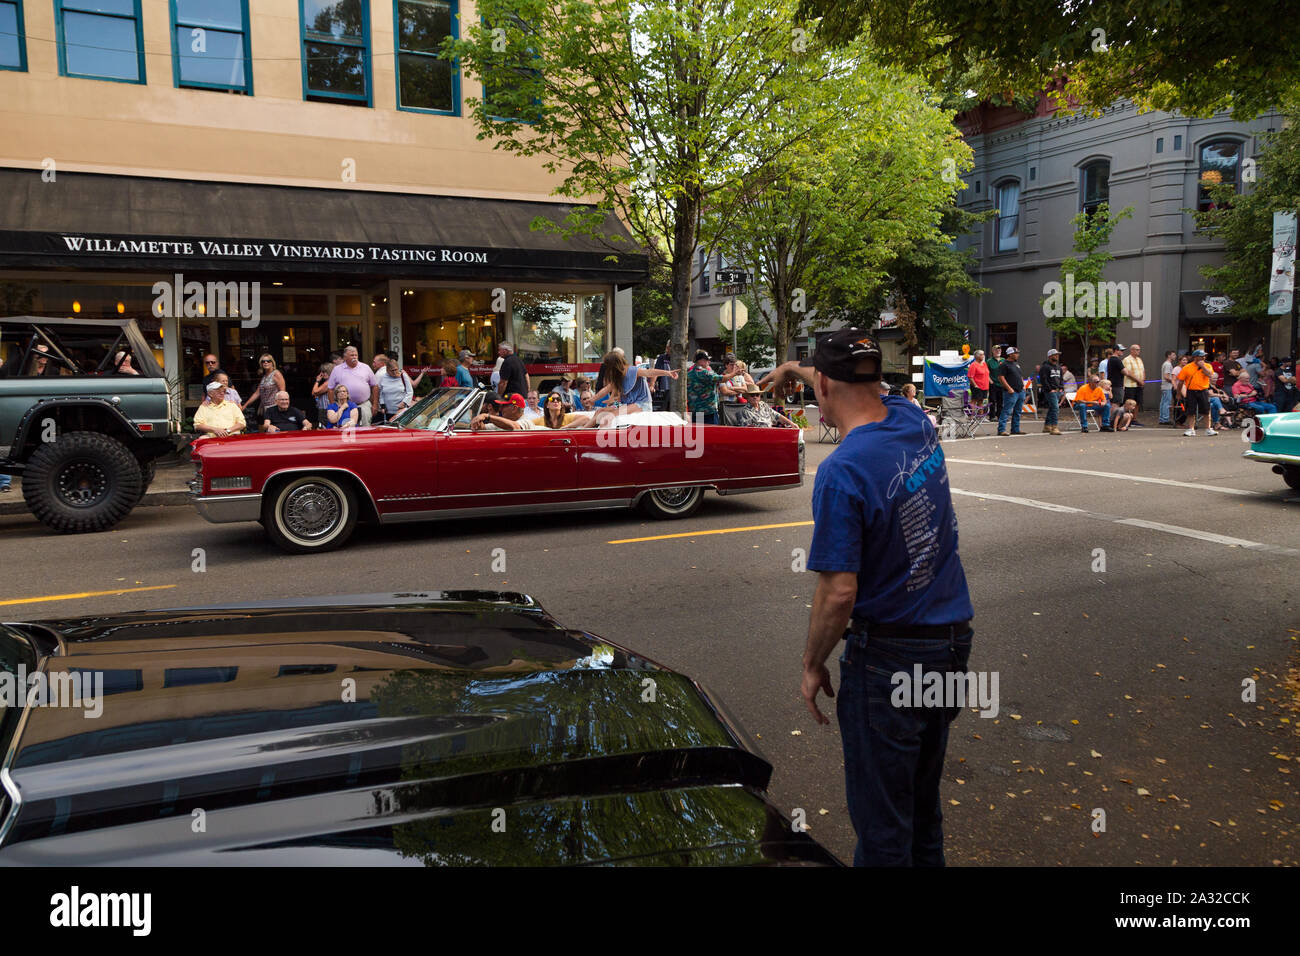 MCMINNVILLE, OR, USA - AUG 24, 2019: A vintage car rally in the center of downtown Mcminnville, OR. Stock Photo